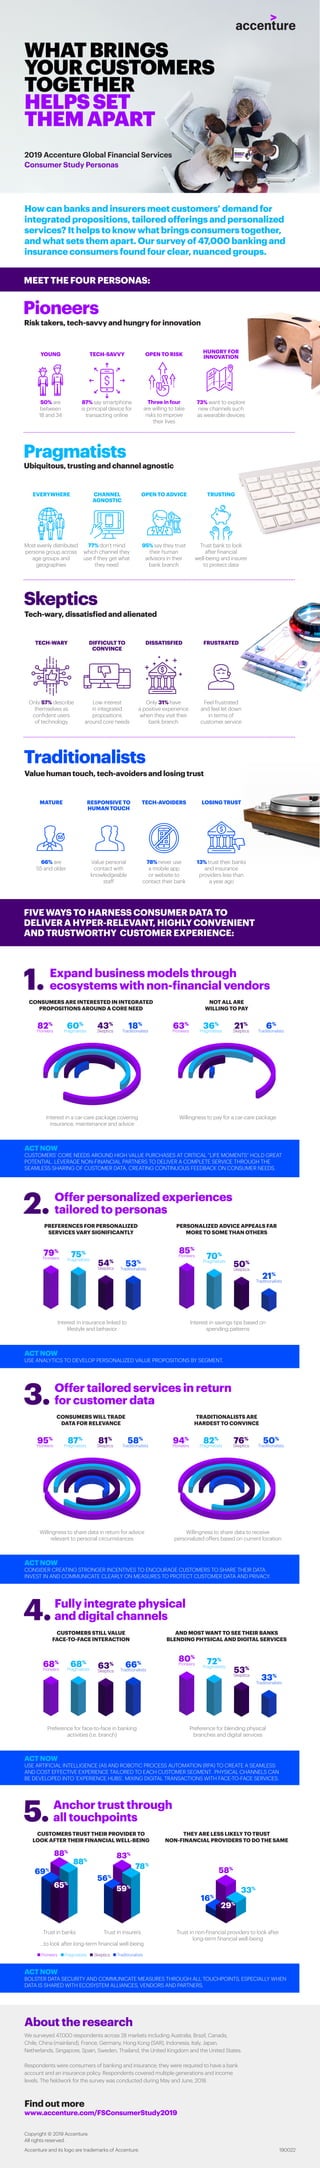 2019 Accenture Global Financial Services
Consumer Study Personas
How can banks and insurers meet customers’ demand for
integrated propositions, tailored offerings and personalized
services? It helps to know what brings consumers together,
and what sets them apart. Our survey of 47,000 banking and
insurance consumers found four clear, nuanced groups.
50% are
between
18 and 34
87% say smartphone
is principal device for
transacting online
YOUNG TECH-SAVVY
Three in four
are willing to take
risks to improve
their lives
OPEN TO RISK
73% want to explore
new channels such
as wearable devices
HUNGRY FOR
INNOVATION
Most evenly distributed
persona group across
age groups and
geographies
77% don’t mind
which channel they
use if they get what
they need
EVERYWHERE CHANNEL
AGNOSTIC
95% say they trust
their human
advisors in their
bank branch
OPEN TO ADVICE
Trust bank to look
after financial
well-being and insurer
to protect data
TRUSTING
1. Expand business models through
ecosystems with non-financial vendors
Risk takers, tech-savvy and hungry for innovation
Pioneers
Ubiquitous, trusting and channel agnostic
Pragmatists
Tech-wary, dissatisfied and alienated
Skeptics
Only 57% describe
themselves as
confident users
of technology
Low interest
in integrated
propositions
around core needs
TECH-WARY DIFFICULT TO
CONVINCE
Only 31% have
a positive experience
when they visit their
bank branch
DISSATISFIED
Feel frustrated
and feel let down
in terms of
customer service
FRUSTRATED
Value human touch, tech-avoiders and losing trust
Traditionalists
FIVE WAYS TO HARNESS CONSUMER DATA TO
DELIVER A HYPER-RELEVANT, HIGHLY CONVENIENT
AND TRUSTWORTHY CUSTOMER EXPERIENCE:
MEET THE FOUR PERSONAS:
ACT NOW
CUSTOMERS’ CORE NEEDS AROUND HIGH VALUE PURCHASES AT CRITICAL “LIFE MOMENTS” HOLD GREAT
POTENTIAL. LEVERAGE NON-FINANCIAL PARTNERS TO DELIVER A COMPLETE SERVICE THROUGH THE
SEAMLESS SHARING OF CUSTOMER DATA, CREATING CONTINUOUS FEEDBACK ON CONSUMER NEEDS.
66% are
55 and older
Value personal
contact with
knowledgeable
staff
MATURE RESPONSIVE TO
HUMAN TOUCH
78% never use
a mobile app
or website to
contact their bank
TECH-AVOIDERS
13% trust their banks
and insurance
providers less than
a year ago
LOSING TRUST
CONSUMERS ARE INTERESTED IN INTEGRATED
PROPOSITIONS AROUND A CORE NEED
NOT ALL ARE
WILLING TO PAY
Interest in a car-care package covering
insurance, maintenance and advice
Willingness to pay for a car-care package
Pioneers Pragmatists Skeptics Traditionalists
82%
60%
43%
18%
Pioneers Pragmatists Skeptics Traditionalists
63%
36%
21%
6%
2. Offer personalized experiences
tailored to personas
ACT NOW
USE ANALYTICS TO DEVELOP PERSONALIZED VALUE PROPOSITIONS BY SEGMENT.
PREFERENCES FOR PERSONALIZED
SERVICES VARY SIGNIFICANTLY
PERSONALIZED ADVICE APPEALS FAR
MORE TO SOME THAN OTHERS
Interest in insurance linked to
lifestyle and behavior
Interest in savings tips based on
spending patterns
3.Offer tailored services in return
for customer data
ACT NOW
CONSIDER CREATING STRONGER INCENTIVES TO ENCOURAGE CUSTOMERS TO SHARE THEIR DATA.
INVEST IN AND COMMUNICATE CLEARLY ON MEASURES TO PROTECT CUSTOMER DATA AND PRIVACY.
CONSUMERS WILL TRADE
DATA FOR RELEVANCE
TRADITIONALISTS ARE
HARDEST TO CONVINCE
Willingness to share data in return for advice
relevant to personal circumstances
Willingness to share data to receive
personalized offers based on current location
Pioneers Pragmatists Skeptics Traditionalists
95%
87%
81%
58%
Pioneers Pragmatists Skeptics Traditionalists
94%
82%
76%
50%
4.Fully integrate physical
and digital channels
ACT NOW
USE ARTIFICIAL INTELLIGENCE (AI) AND ROBOTIC PROCESS AUTOMATION (RPA) TO CREATE A SEAMLESS
AND COST EFFECTIVE EXPERIENCE TAILORED TO EACH CUSTOMER SEGMENT. PHYSICAL CHANNELS CAN
BE DEVELOPED INTO ‘EXPERIENCE HUBS’, MIXING DIGITAL TRANSACTIONS WITH FACE-TO-FACE SERVICES.
CUSTOMERS STILL VALUE
FACE-TO-FACE INTERACTION
AND MOST WANT TO SEE THEIR BANKS
BLENDING PHYSICAL AND DIGITAL SERVICES
Preference for face-to-face in banking
activities (i.e. branch)
Preference for blending physical
branches and digital services
Pioneers
80%
Pragmatists
72%
Skeptics
53%
Traditionalists
33%
5.Anchor trust through
all touchpoints
About the research
Find out more
www.accenture.com/FSConsumerStudy2019
ACT NOW
BOLSTER DATA SECURITY AND COMMUNICATE MEASURES THROUGH ALL TOUCHPOINTS, ESPECIALLY WHEN
DATA IS SHARED WITH ECOSYSTEM ALLIANCES, VENDORS AND PARTNERS.
We surveyed 47,000 respondents across 28 markets including Australia, Brazil, Canada,
Chile, China (mainland), France, Germany, Hong Kong (SAR), Indonesia, Italy, Japan,
Netherlands, Singapore, Spain, Sweden, Thailand, the United Kingdom and the United States.
Respondents were consumers of banking and insurance; they were required to have a bank
account and an insurance policy. Respondents covered multiple generations and income
levels. The fieldwork for the survey was conducted during May and June, 2018.
190022
Copyright © 2019 Accenture.
All rights reserved.
Accenture and its logo are trademarks of Accenture.
CUSTOMERS TRUST THEIR PROVIDER TO
LOOK AFTER THEIR FINANCIAL WELL-BEING
THEY ARE LESS LIKELY TO TRUST
NON-FINANCIAL PROVIDERS TO DO THE SAME
Trust in banks Trust in insurers
...to look after long-term financial well-being
Trust in non-financial providers to look after
long-term financial well-being
Pioneers
79%
Pragmatists
75%
Skeptics
54%
Traditionalists
53%
Pioneers
85%
Pragmatists
70%
Skeptics
50%
Traditionalists
21%
Pioneers
68%
Pragmatists
68%
Skeptics
63%
Traditionalists
66%
WHATBRINGS
YOURCUSTOMERS
TOGETHER
HELPSSET
THEMAPART
58%
33%
16%
29%
 